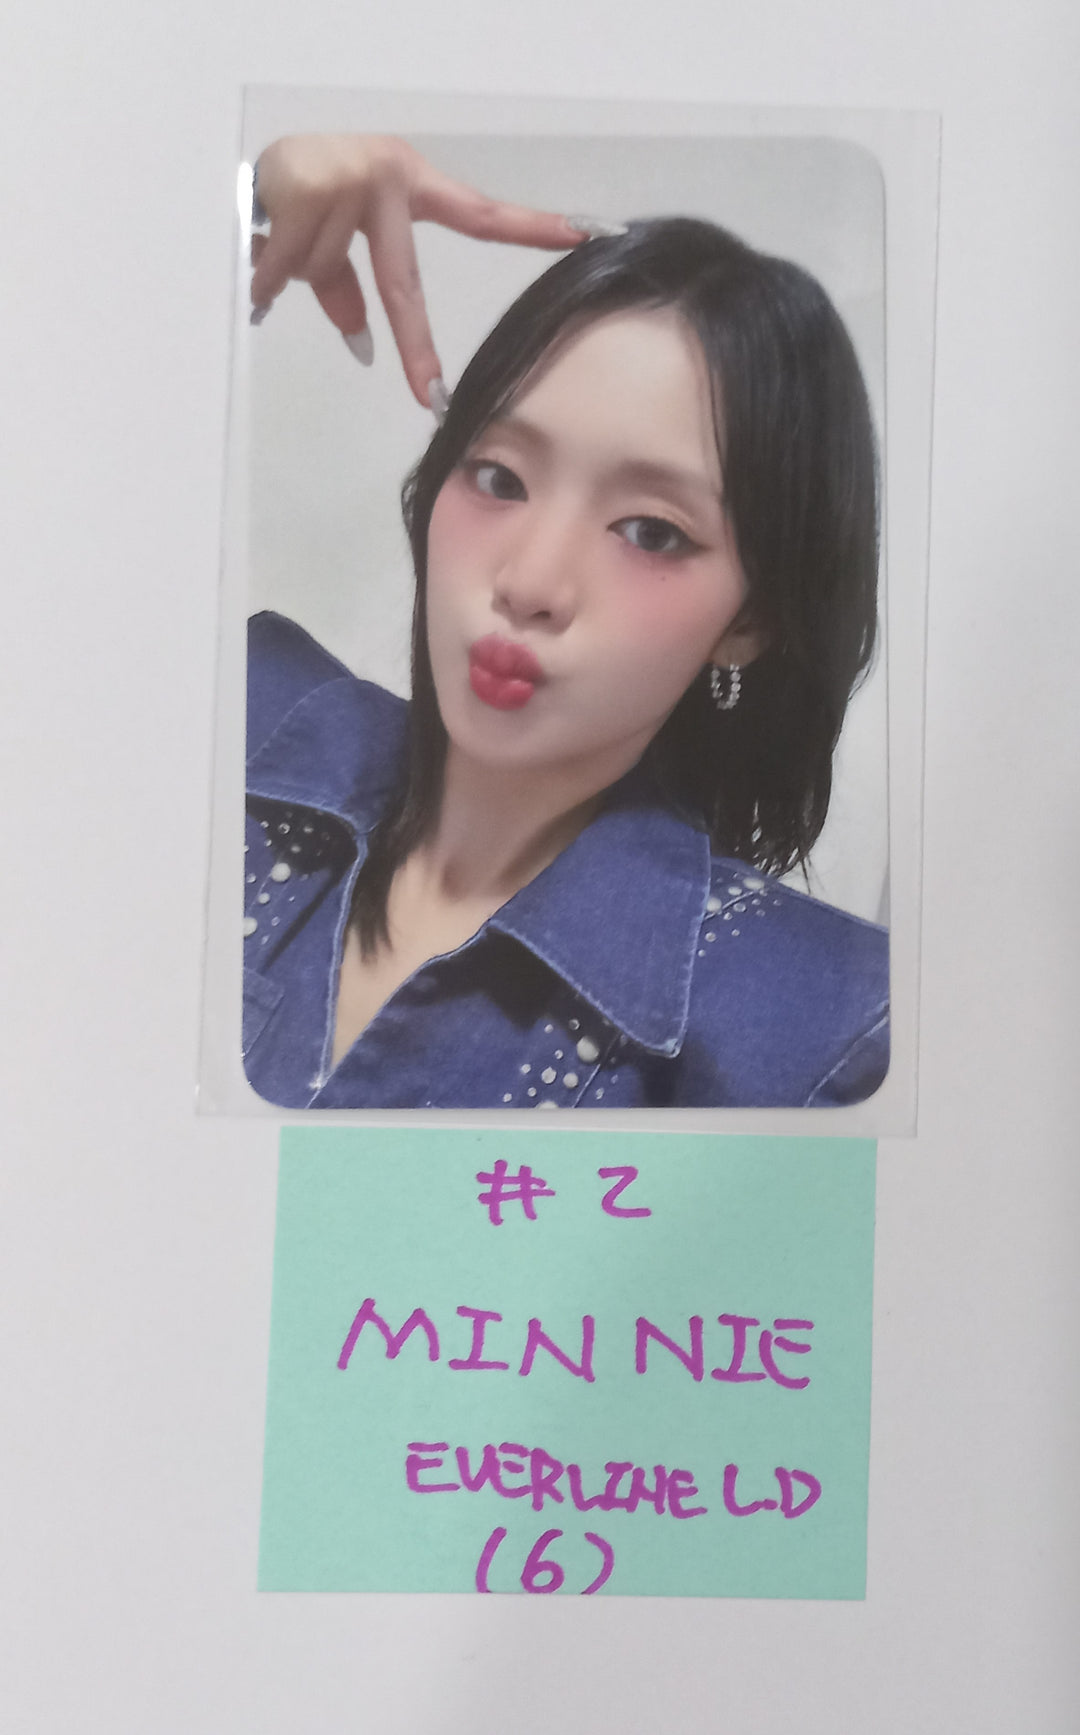 (g) I-DLE "2" 2nd Full Album - Everline Lucky Draw Event Photocard [24.3.28]